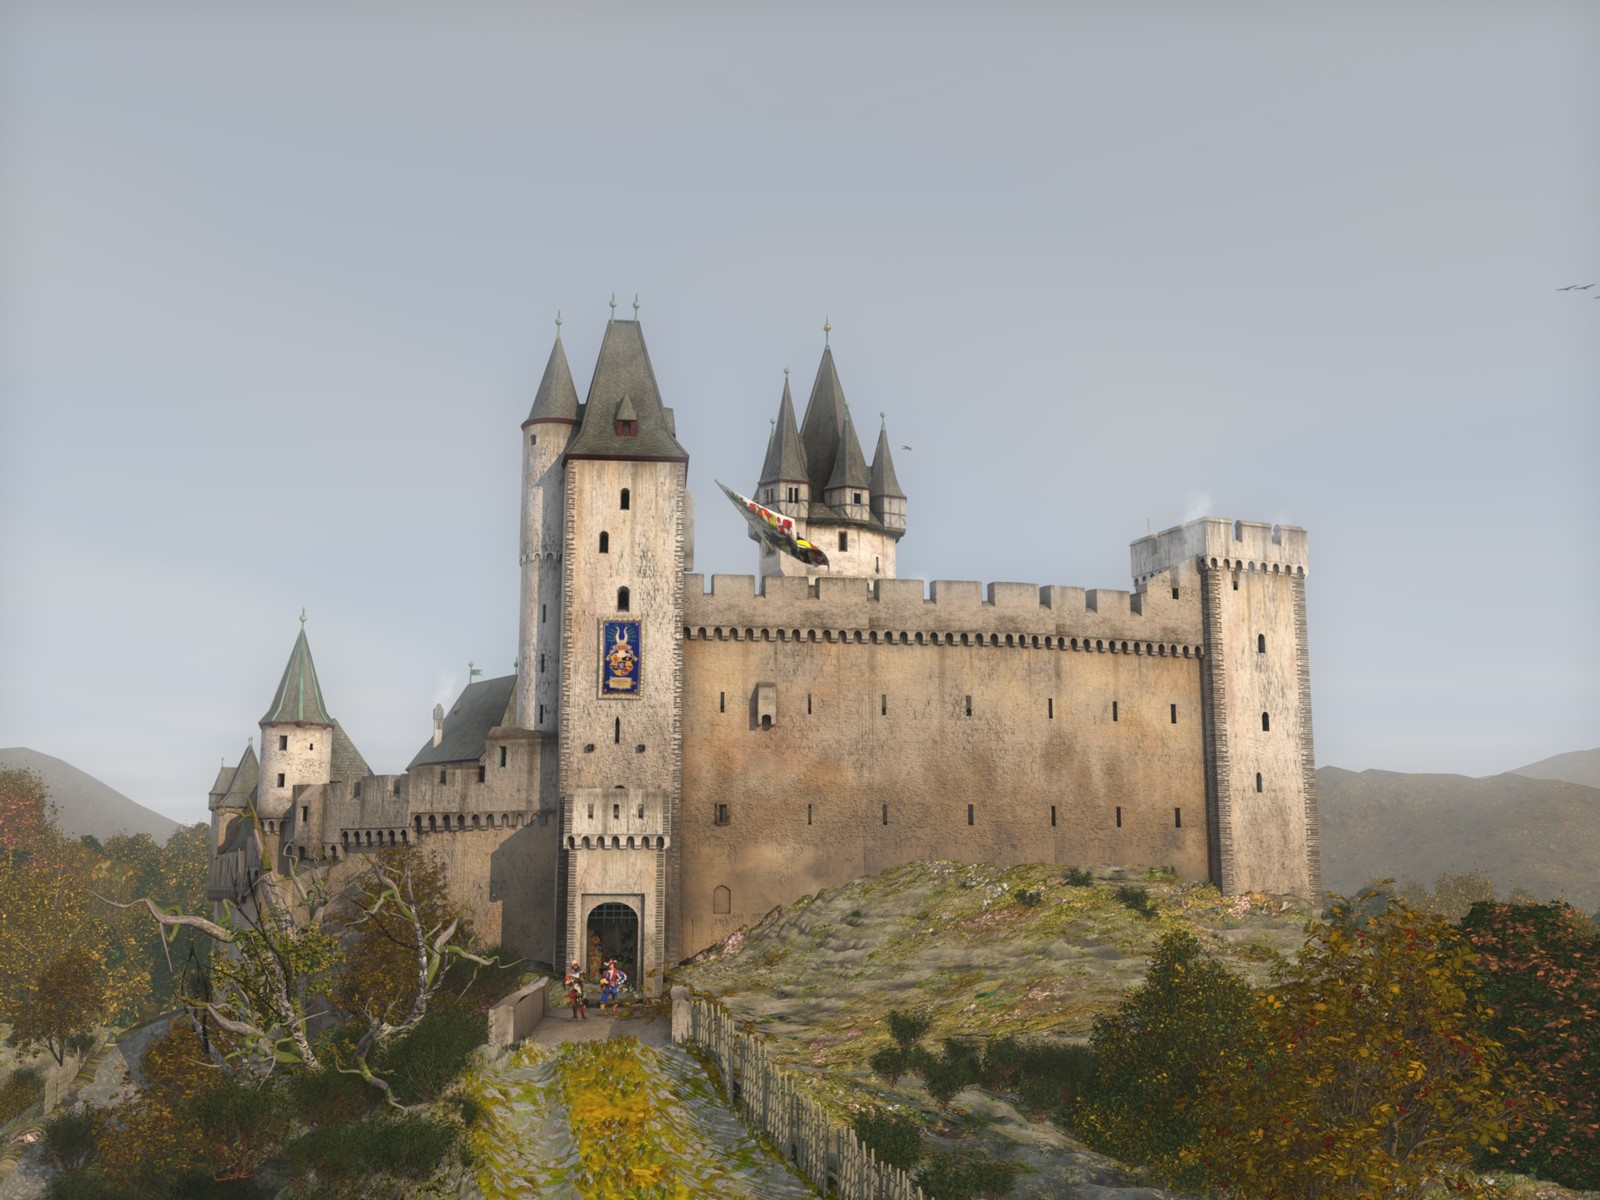 Rendering of Hohnstein Castle in the Taunus region as it looked in the middle of the 15th century. Outside shield wall.